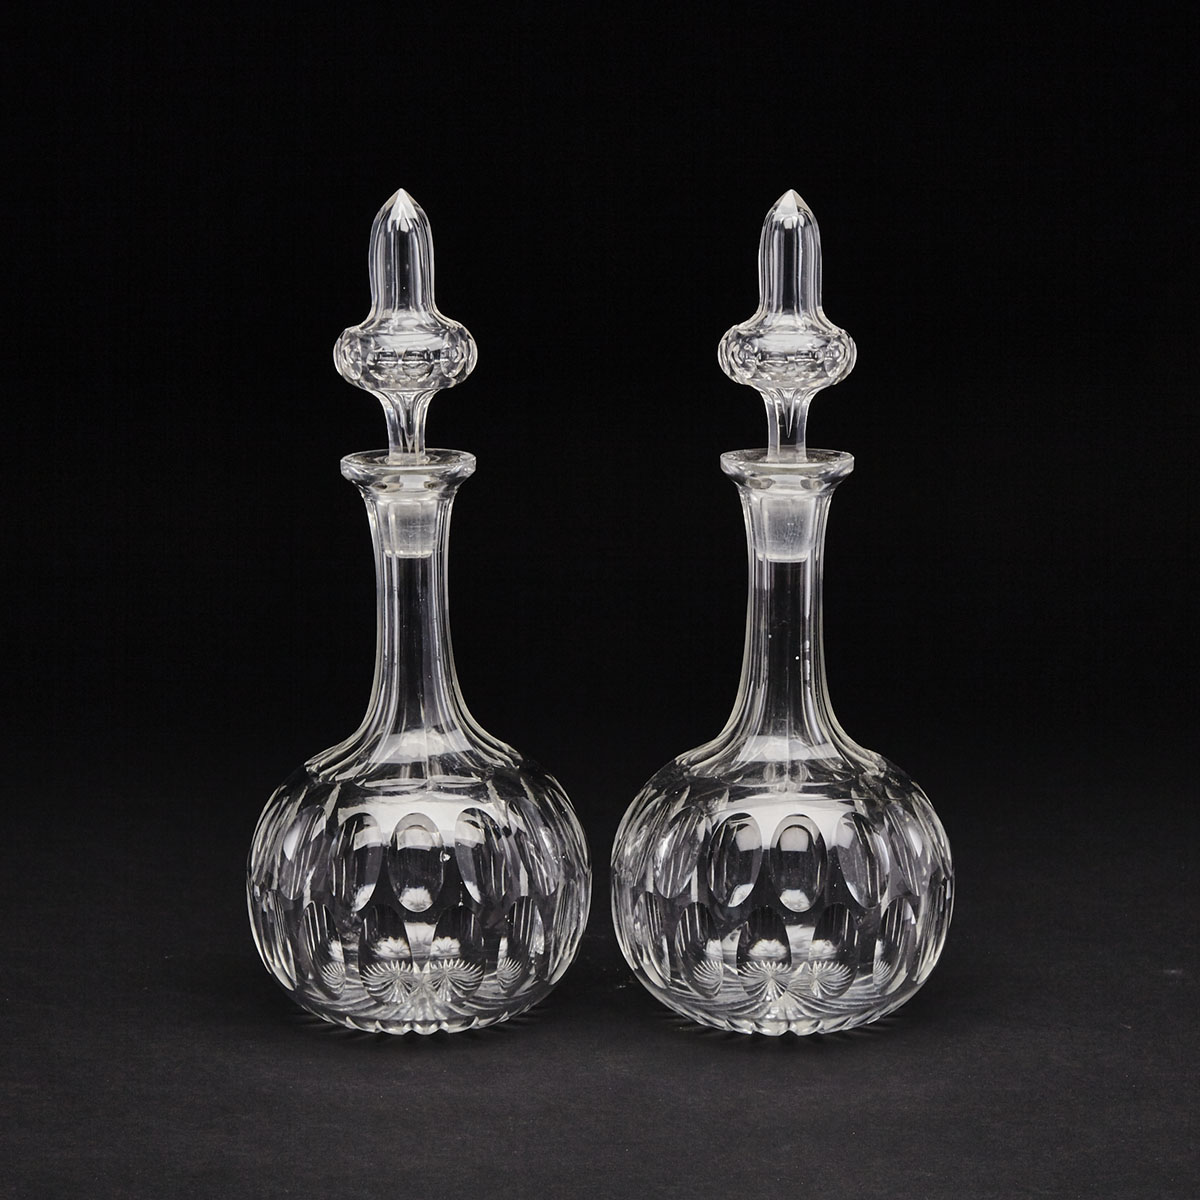 Pair of English Cut Glass Decanters, late 19th century